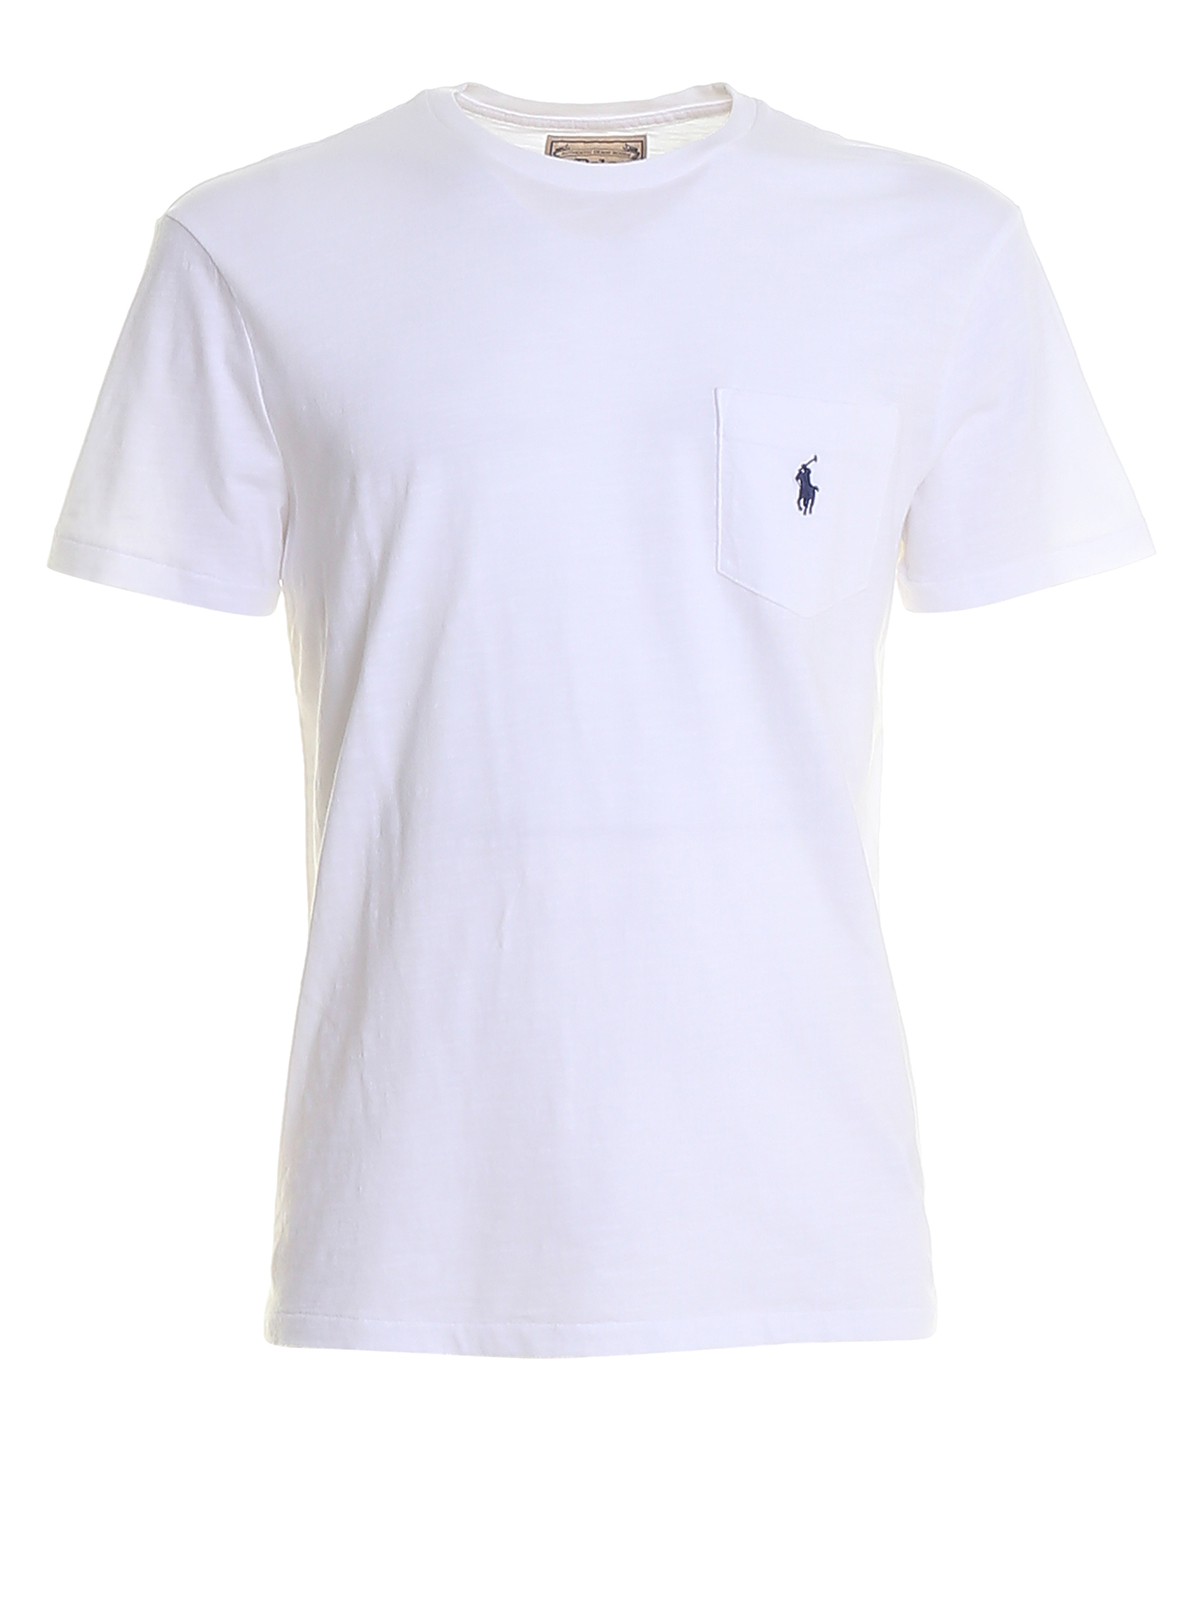 Polo Ralph Lauren White Embroidered Chest Pocket T-shirt